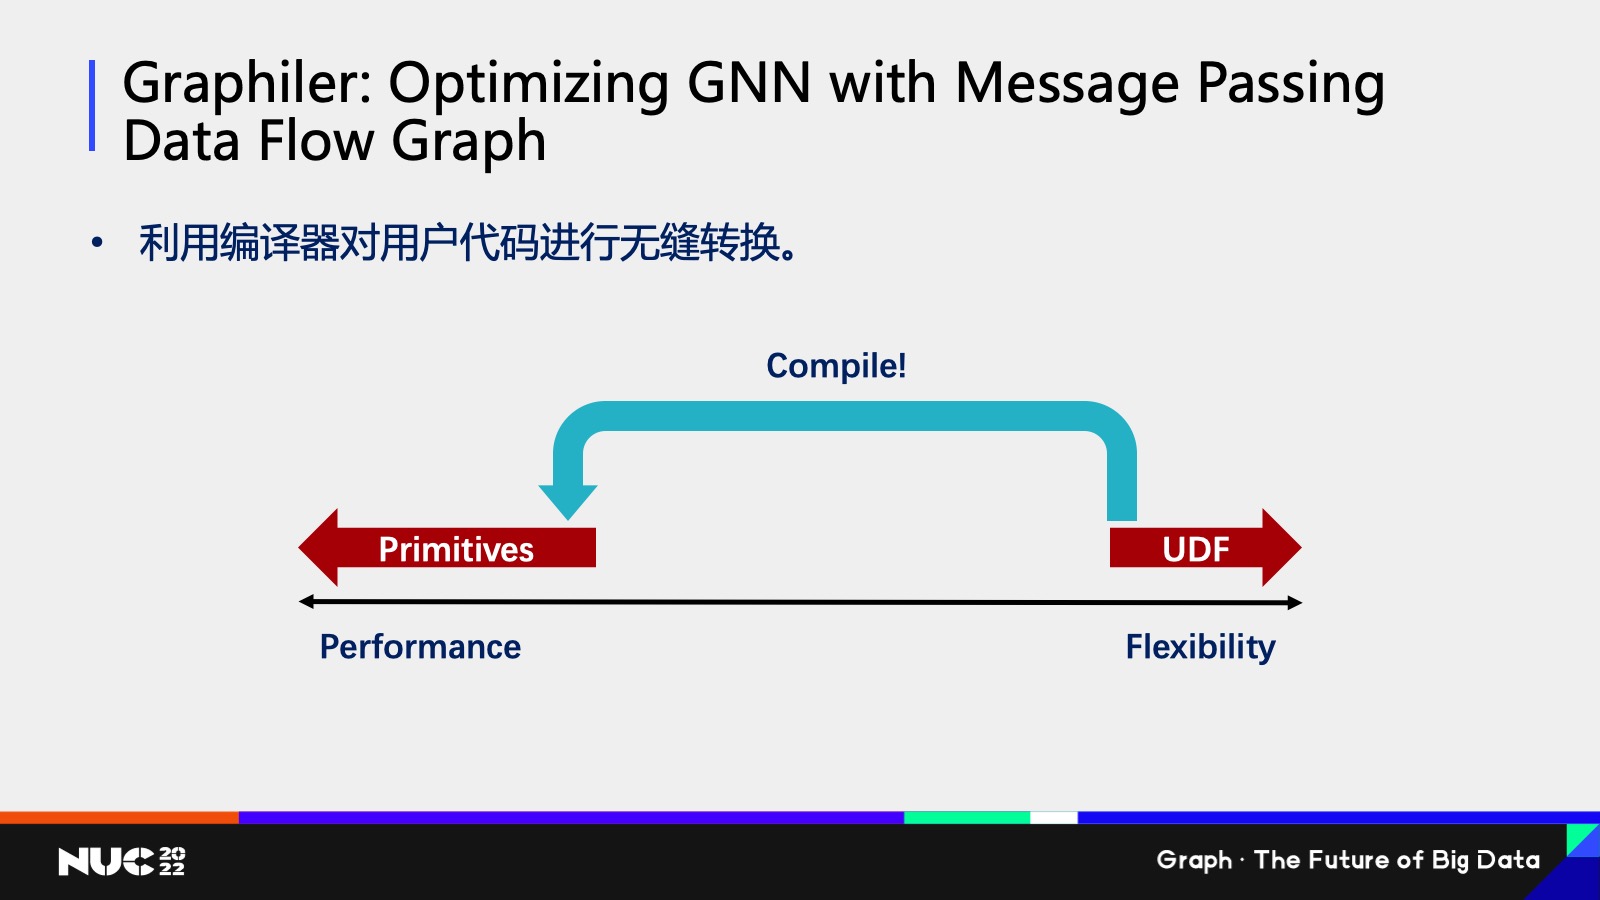 Graphiler: Optimizing GNN with Message Passing Data Flow Graph